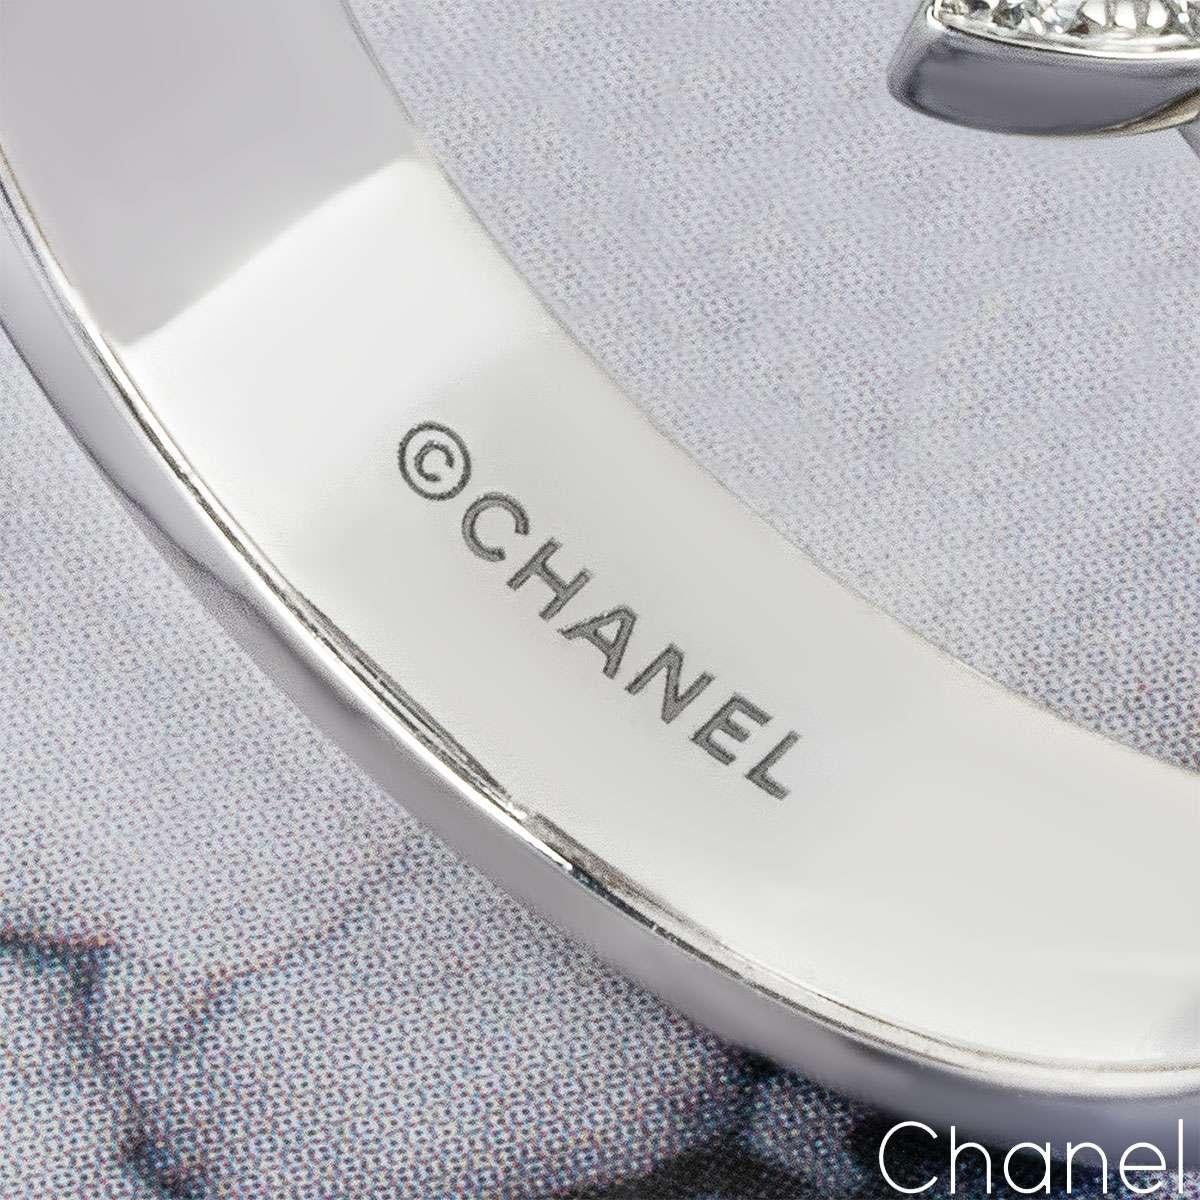 Chanel White Gold Diamond Eternal No.5 Ring Size 55 J12002 In Excellent Condition For Sale In London, GB